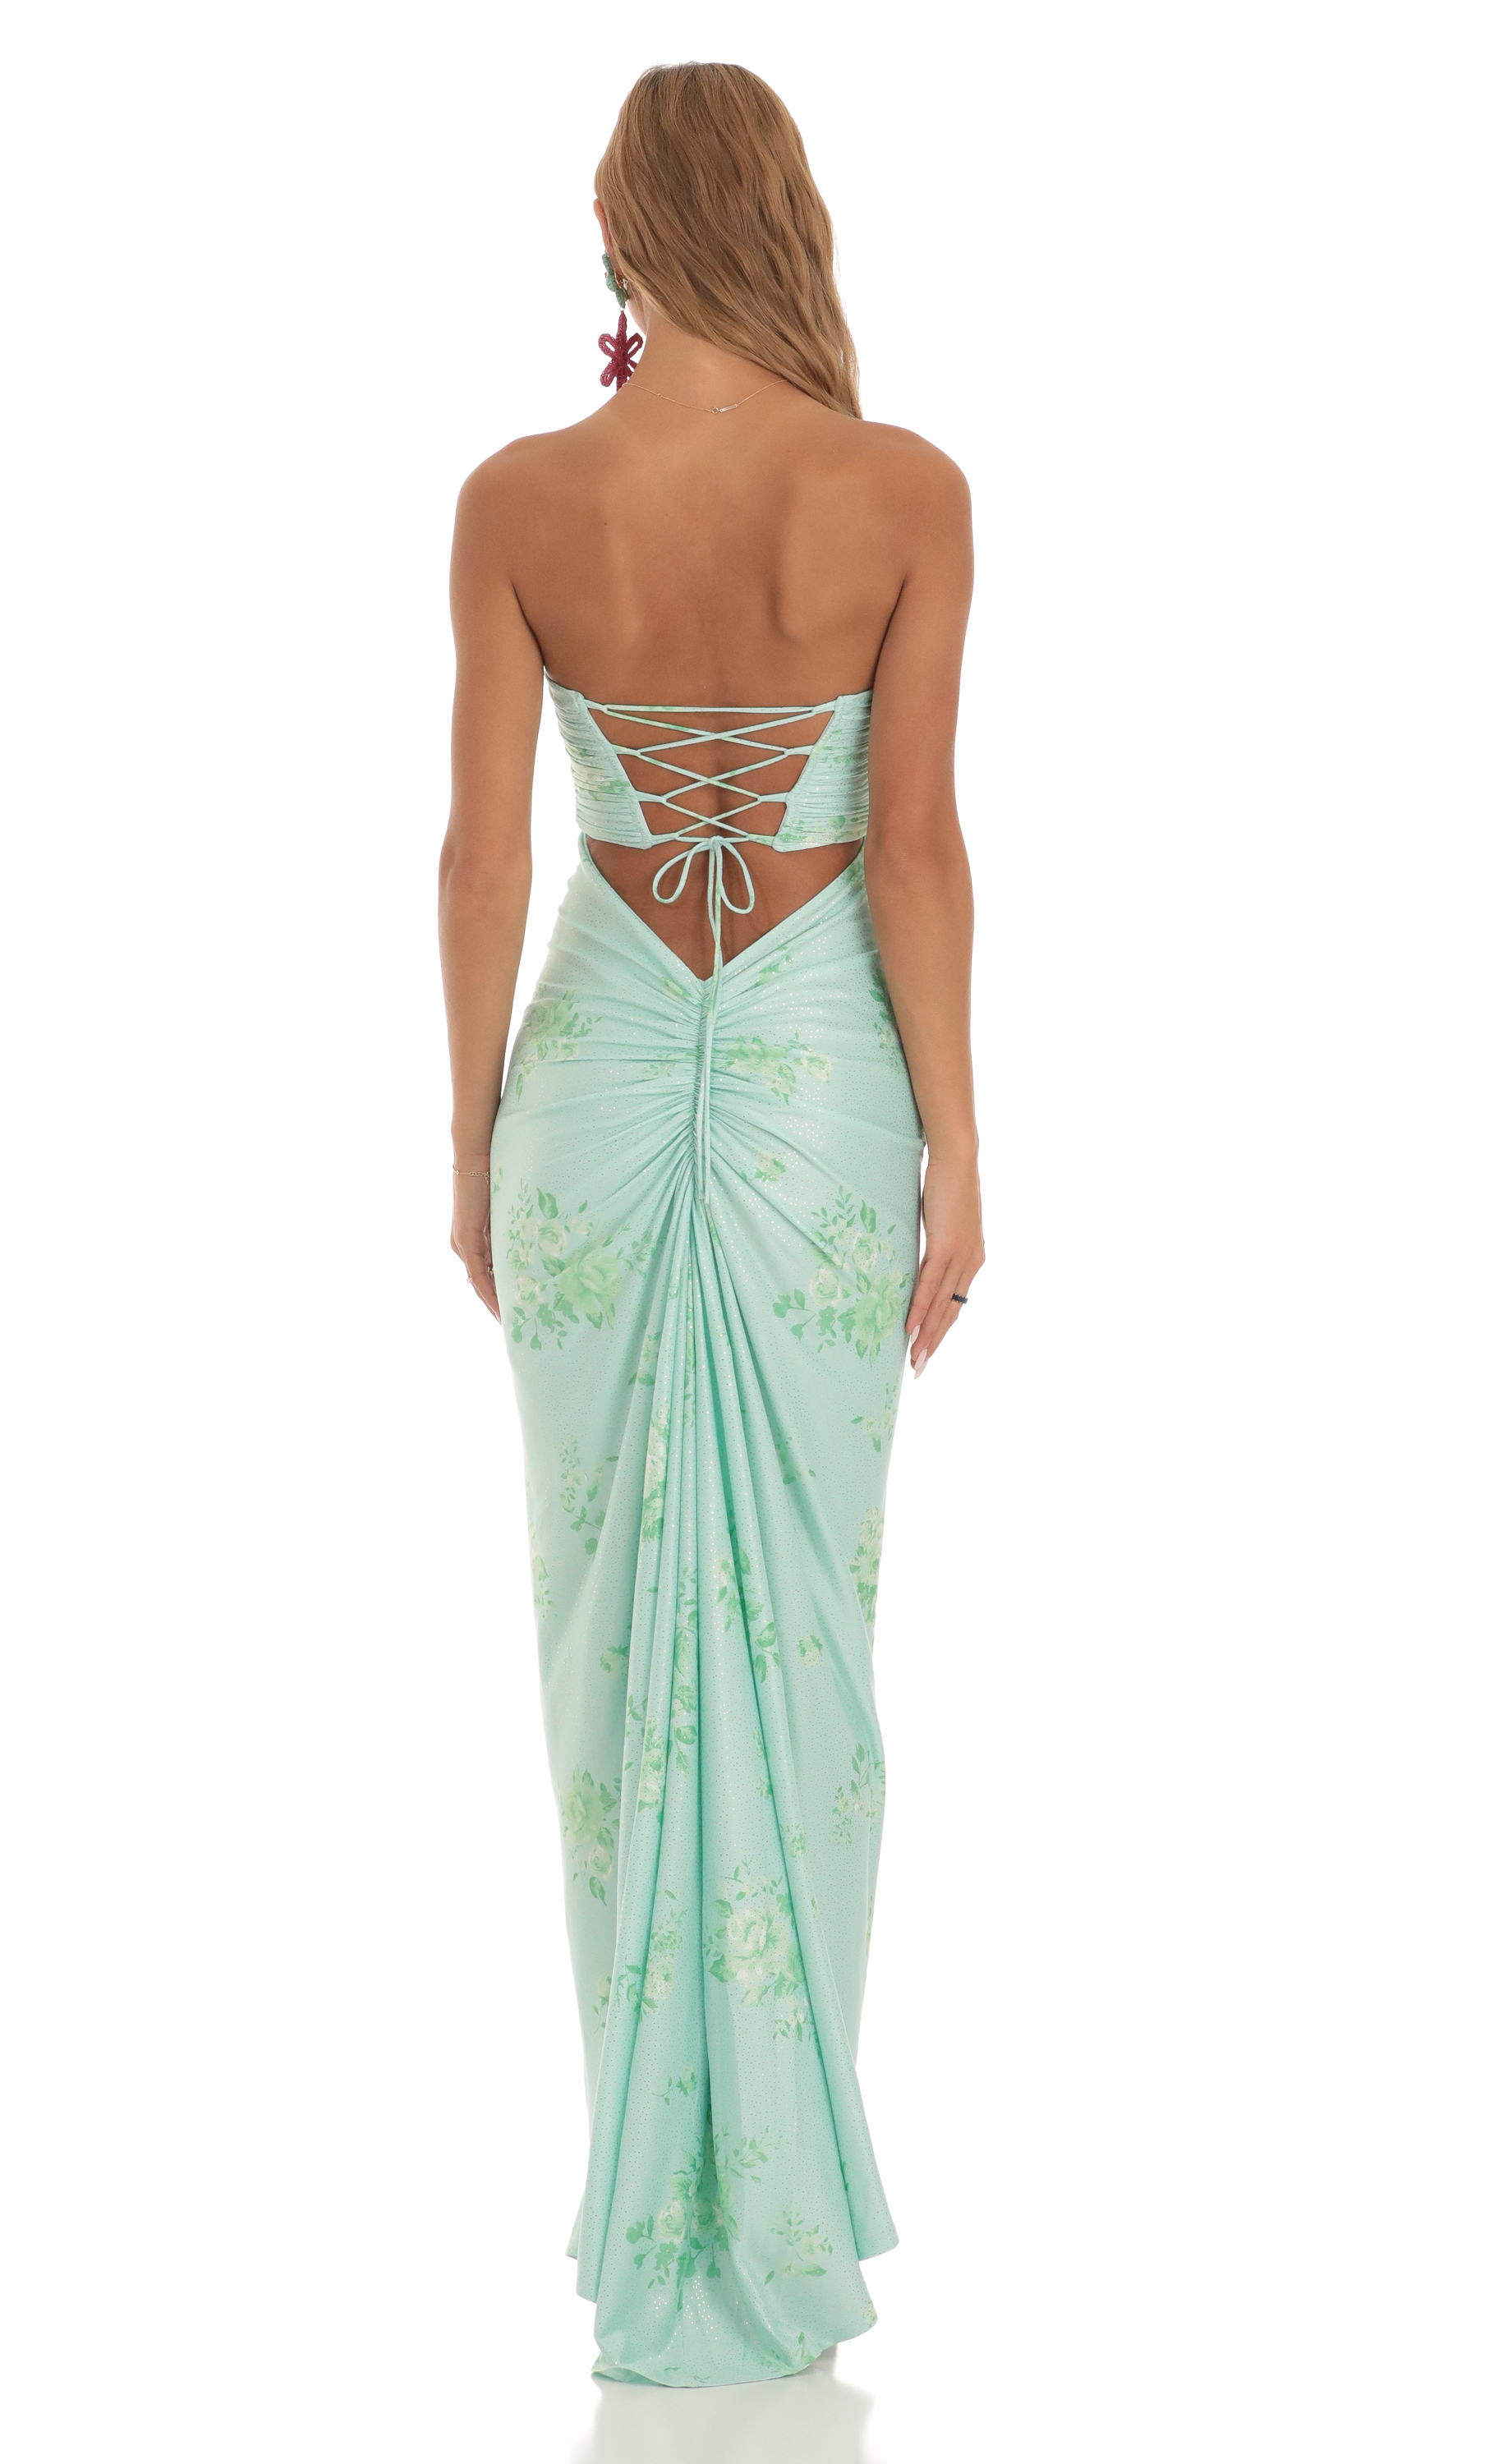 Foiled Foiled Corset Strapless Dress in Turquoise